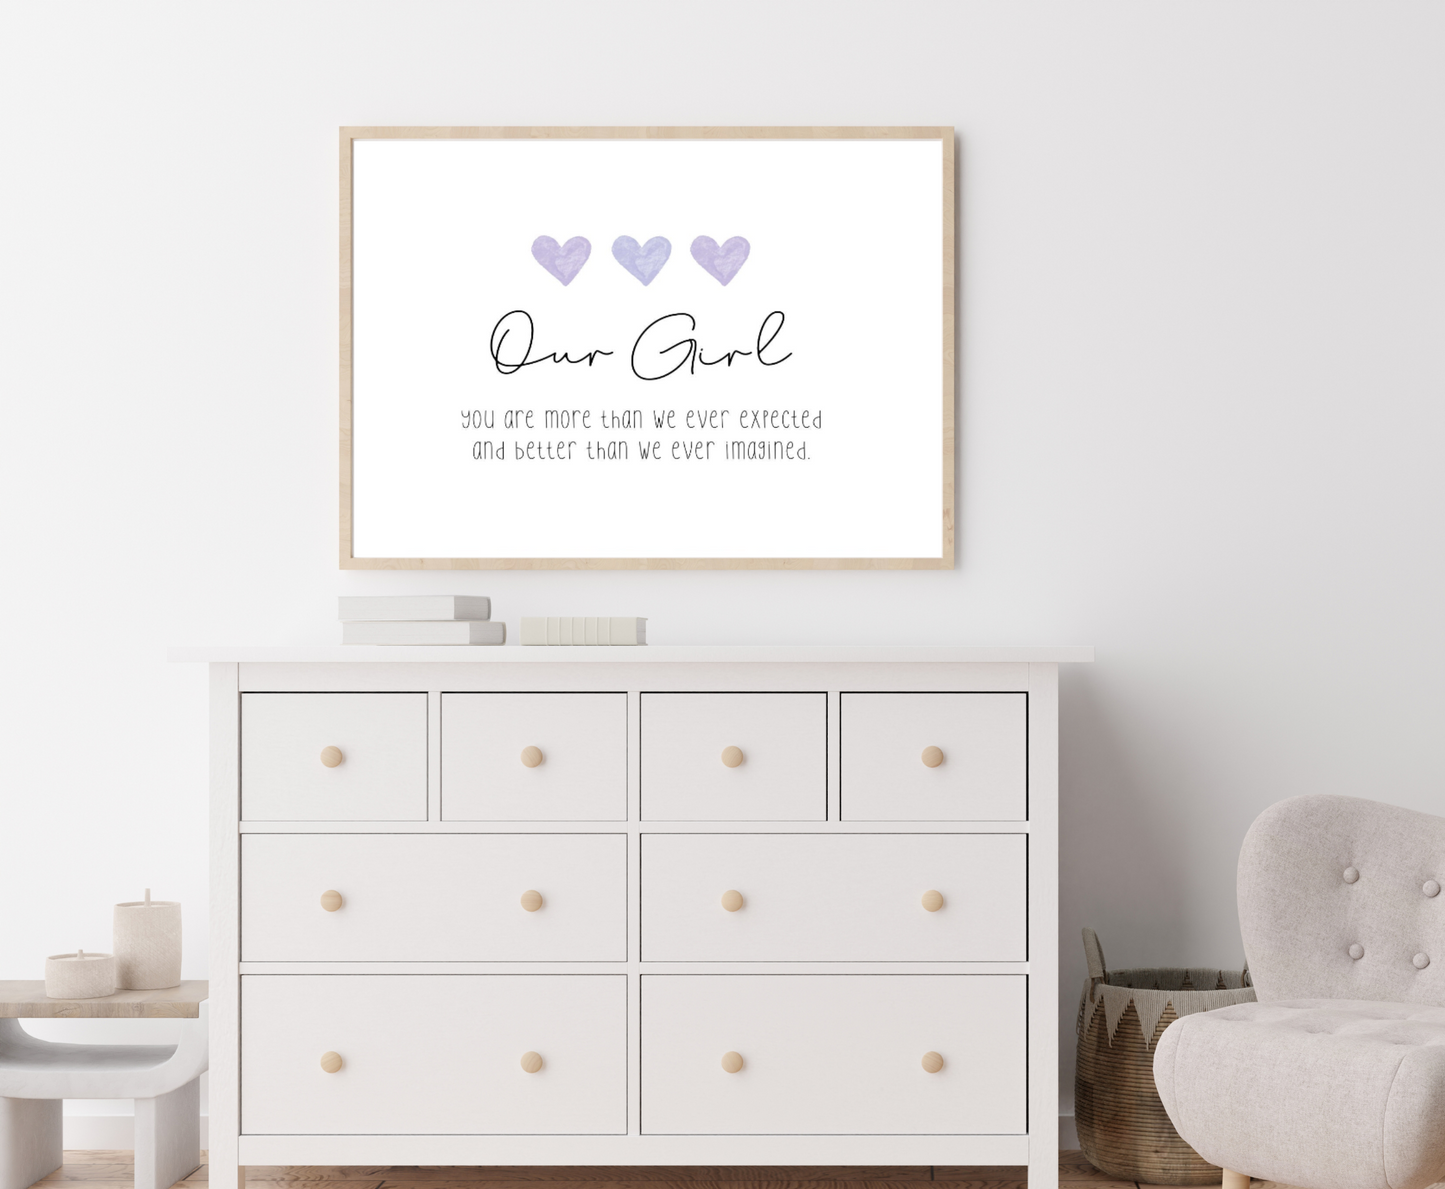 A picture showing a white dresser with a little girl’s graphic hanging on the wall right above the latter. The graphic is showing three purple blue hearts with a piece of writing below that says: Our girl, you are more than we ever expected, and better than we ever imagined.